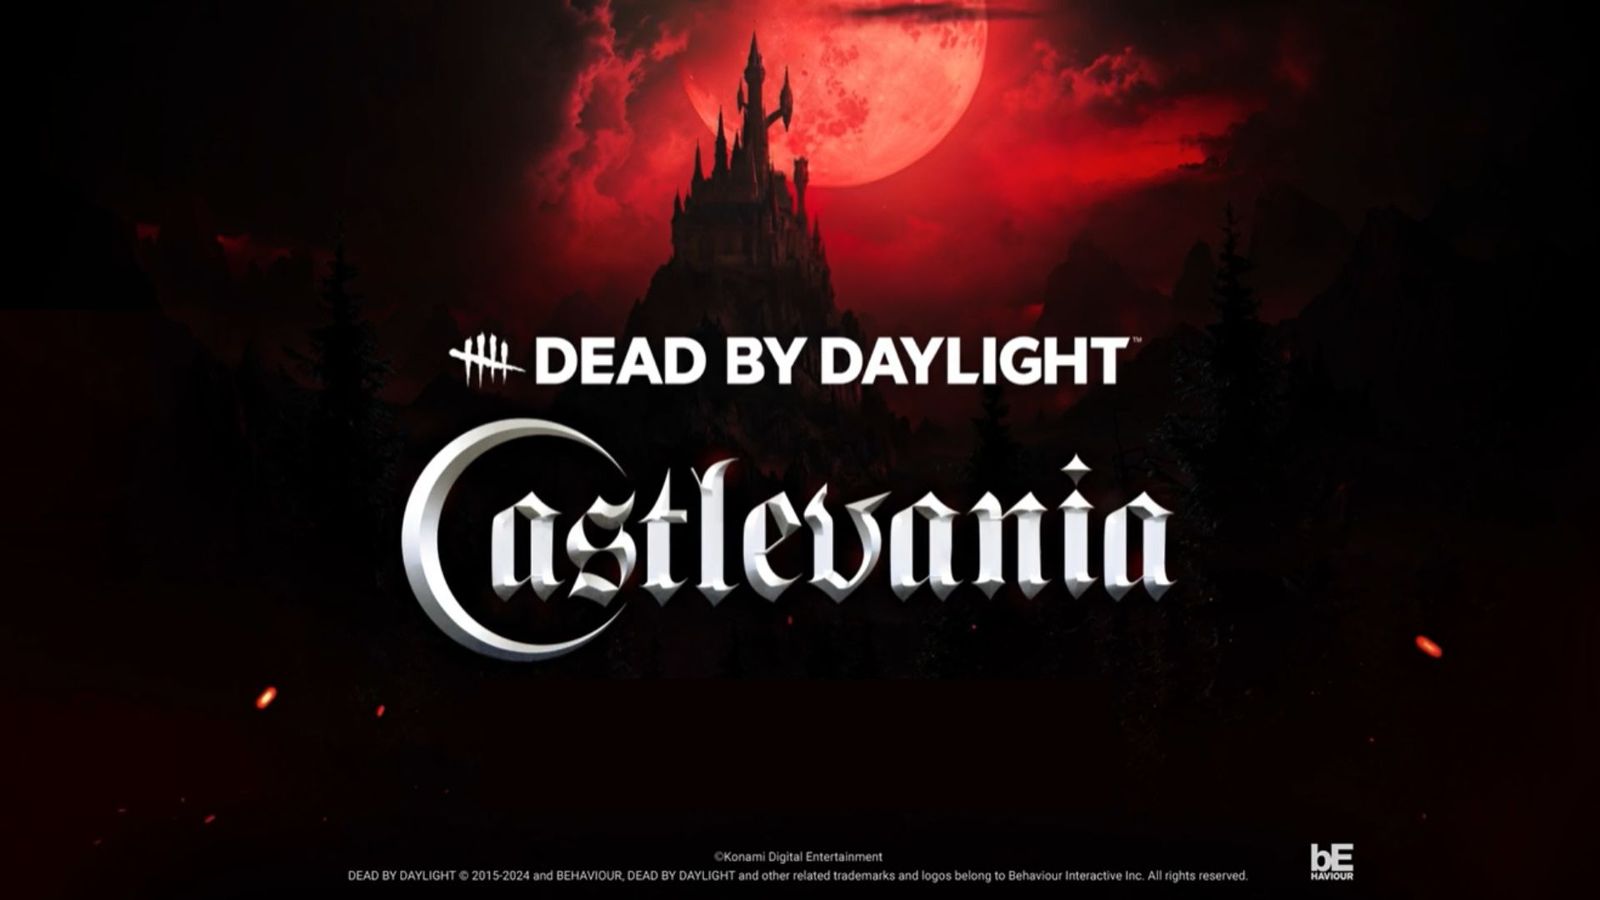 Dead by Daylight logo over a background image of a dark castle that sits proudly in front of a haunting, red moon.